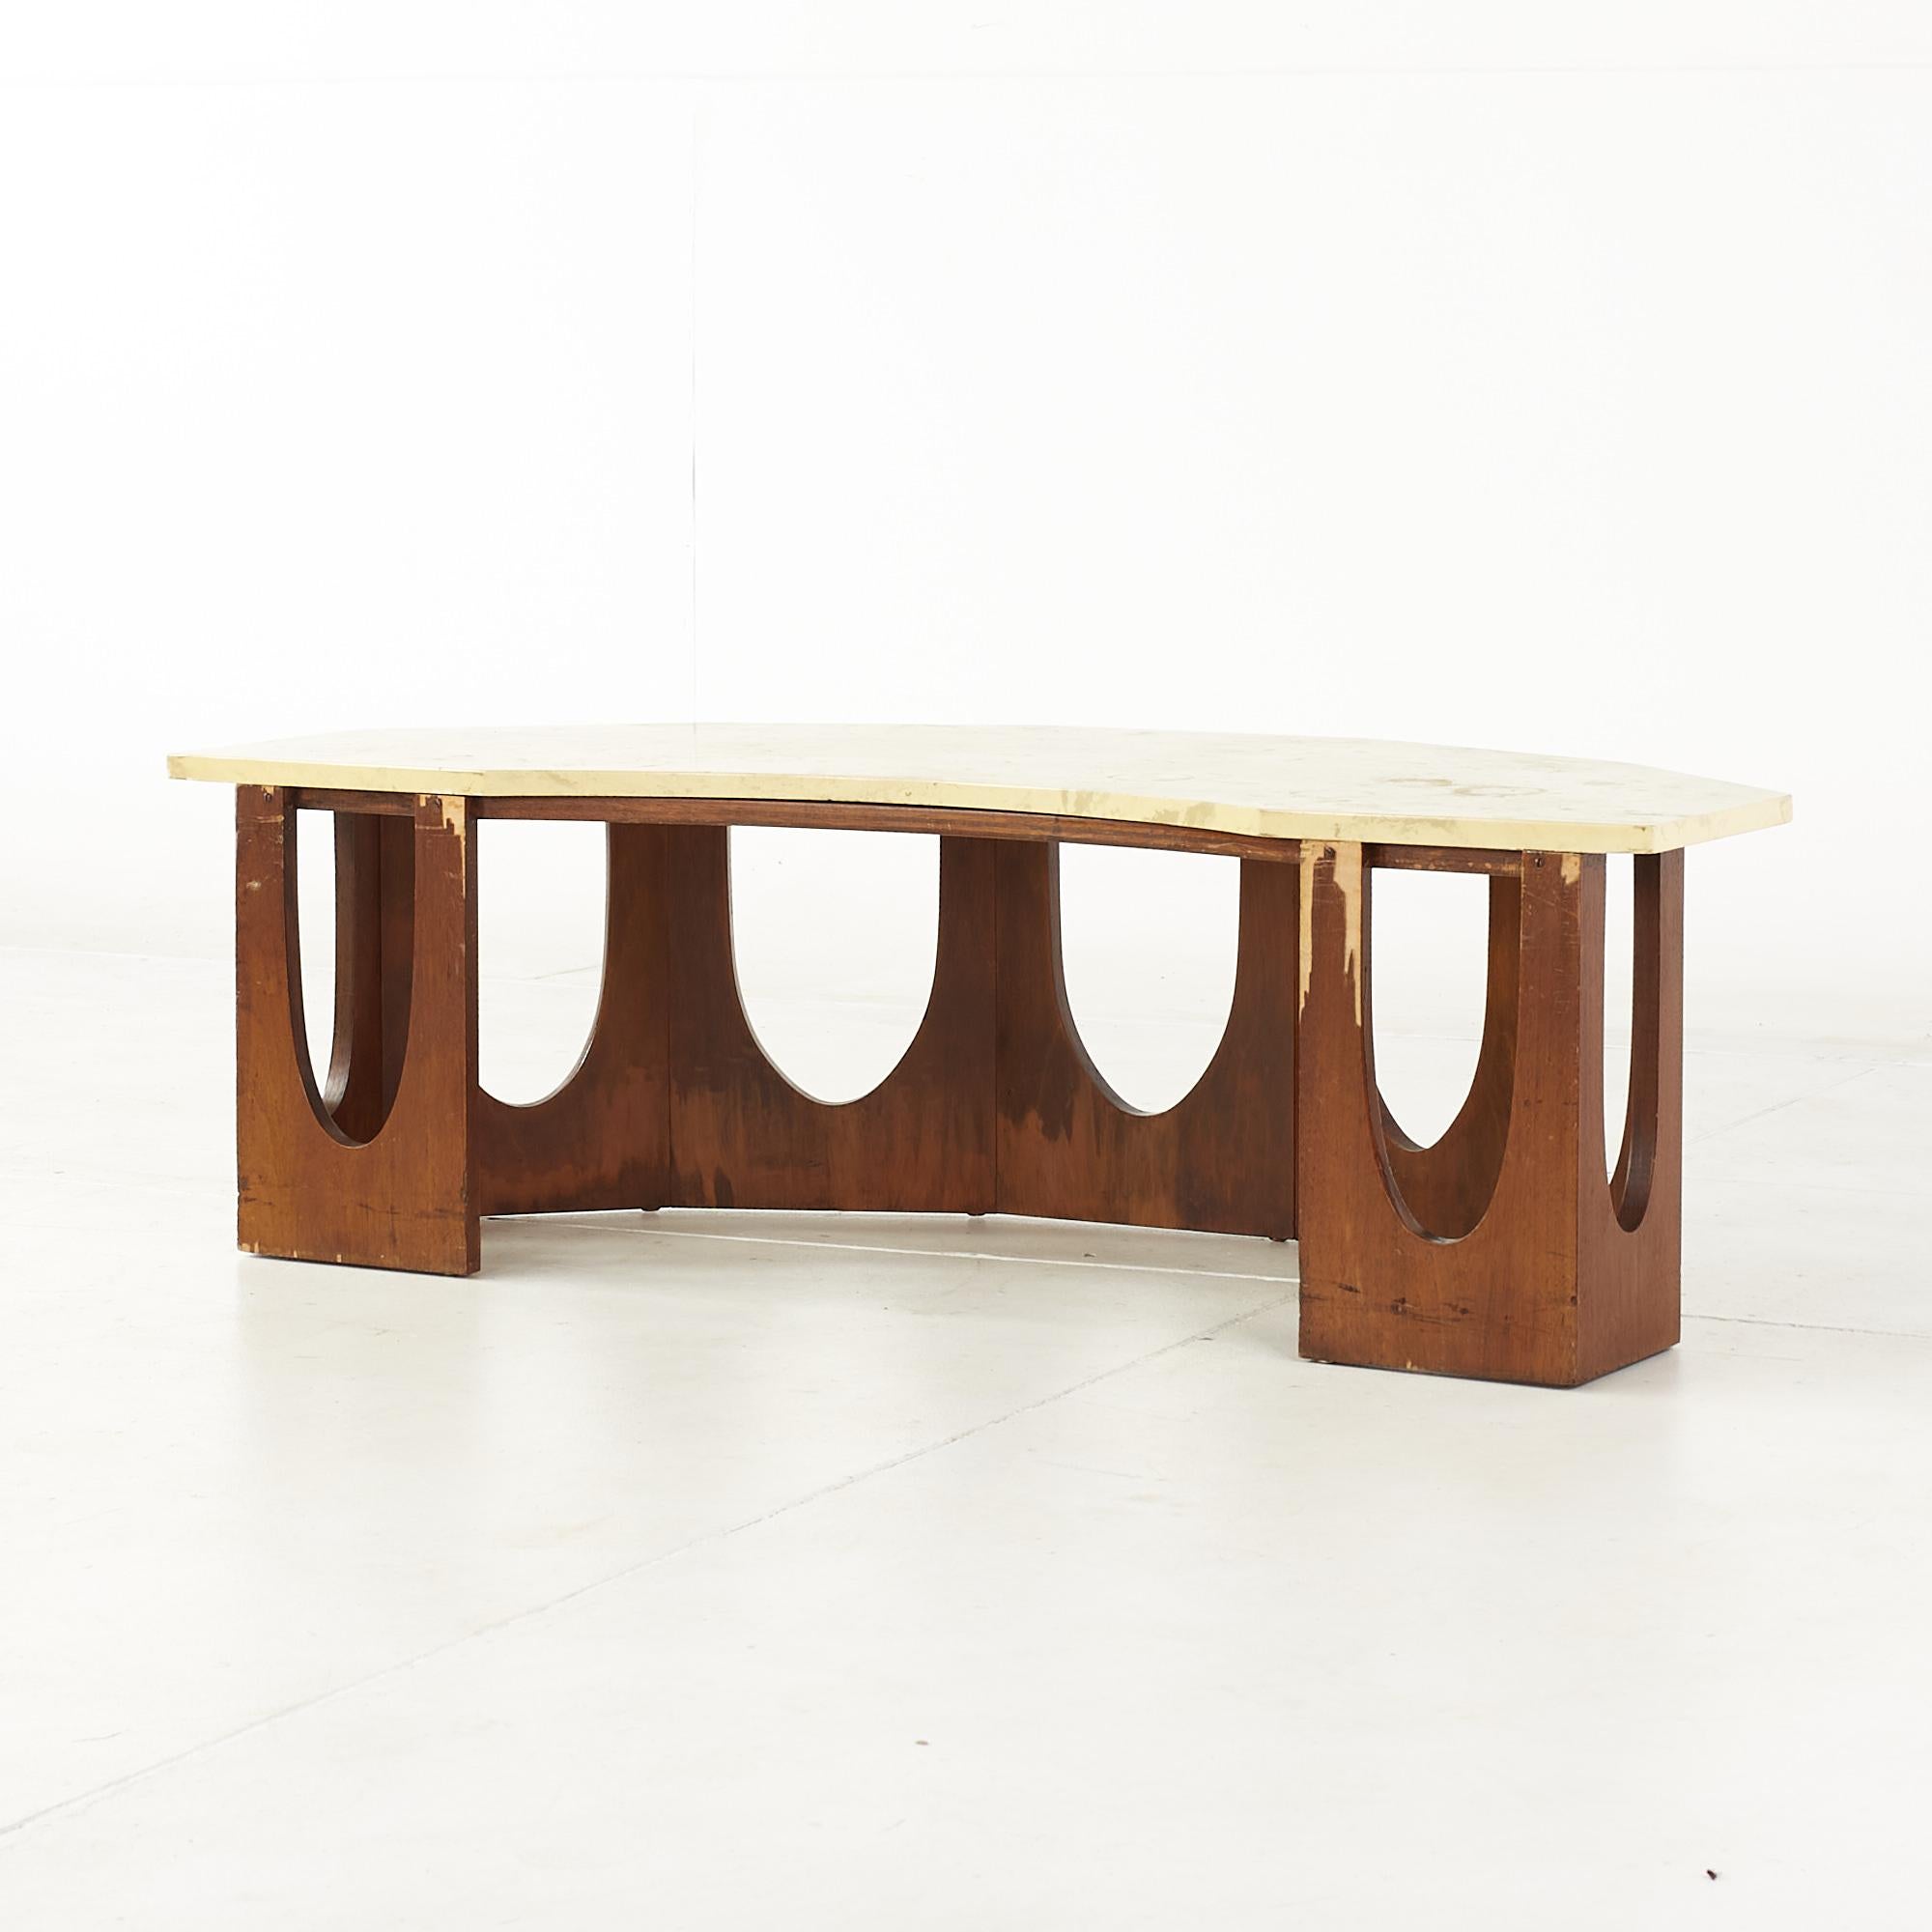 Harvey Probber Mid Century Walnut and Travetine Half Crescent Moon Coffee Table For Sale 1